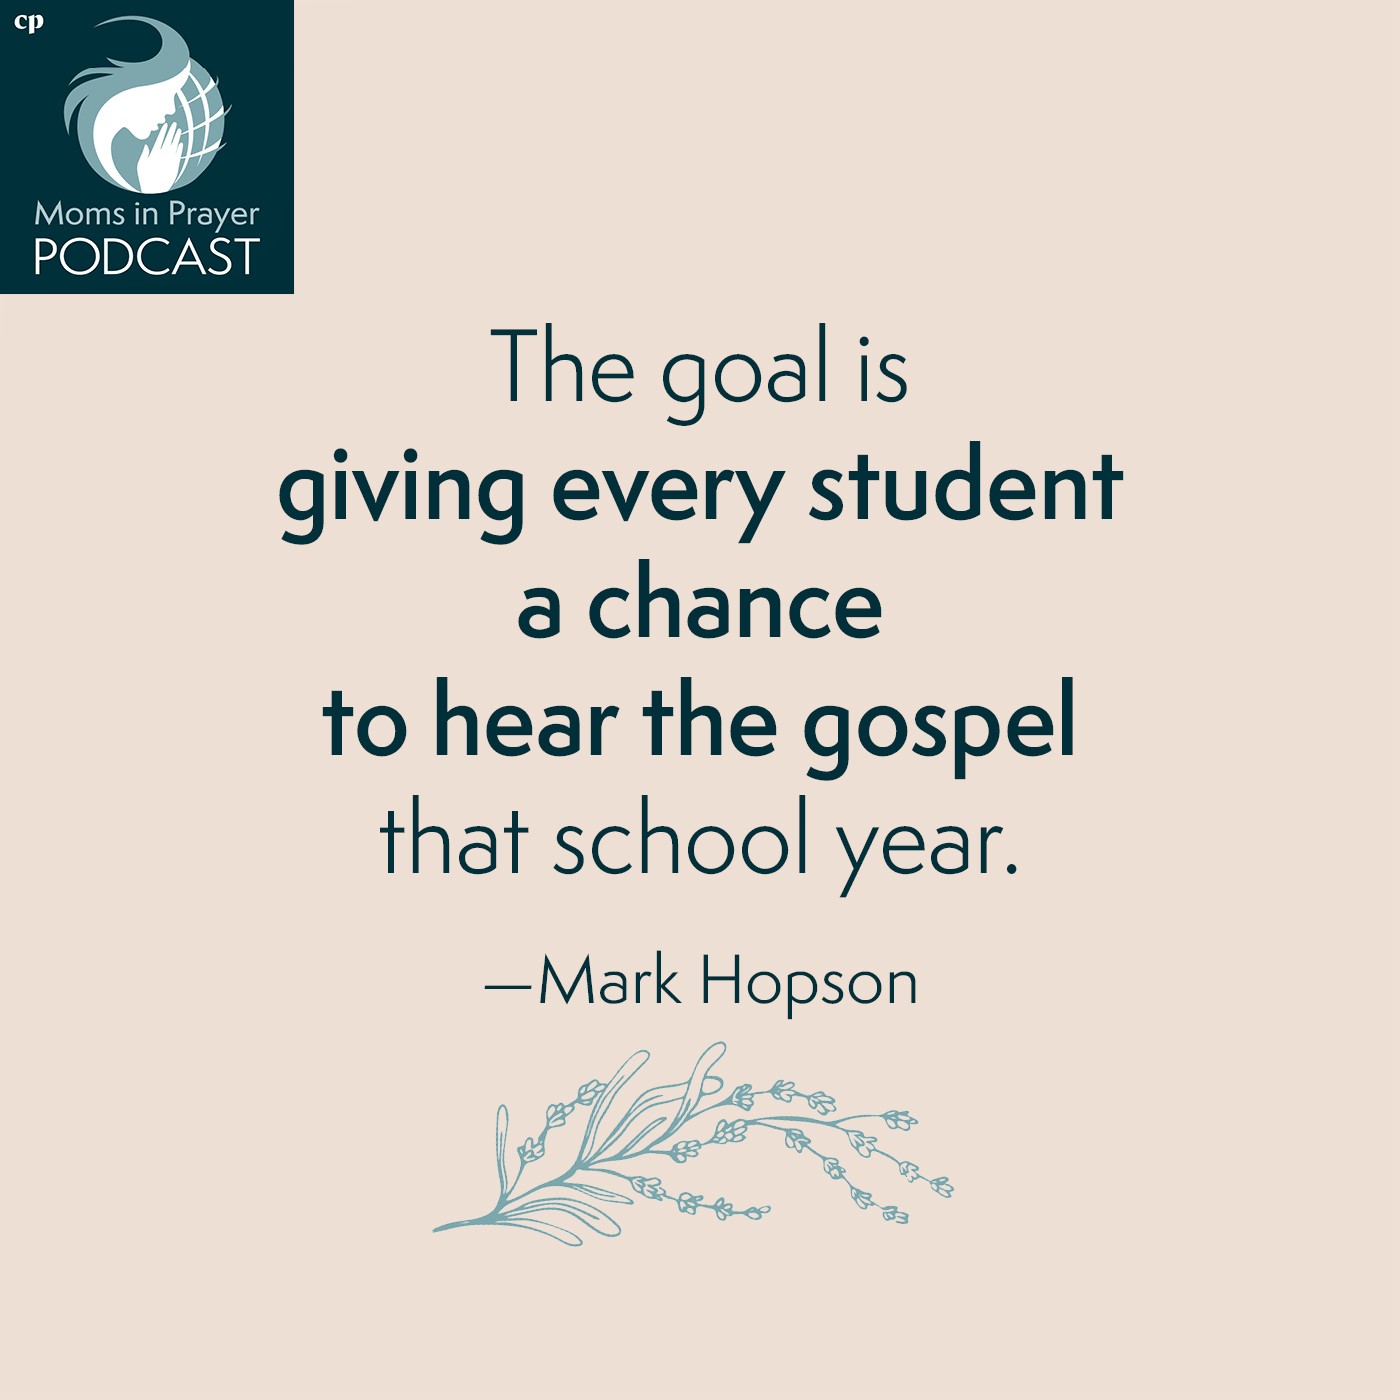 Giving every student a chance to hear the gospel